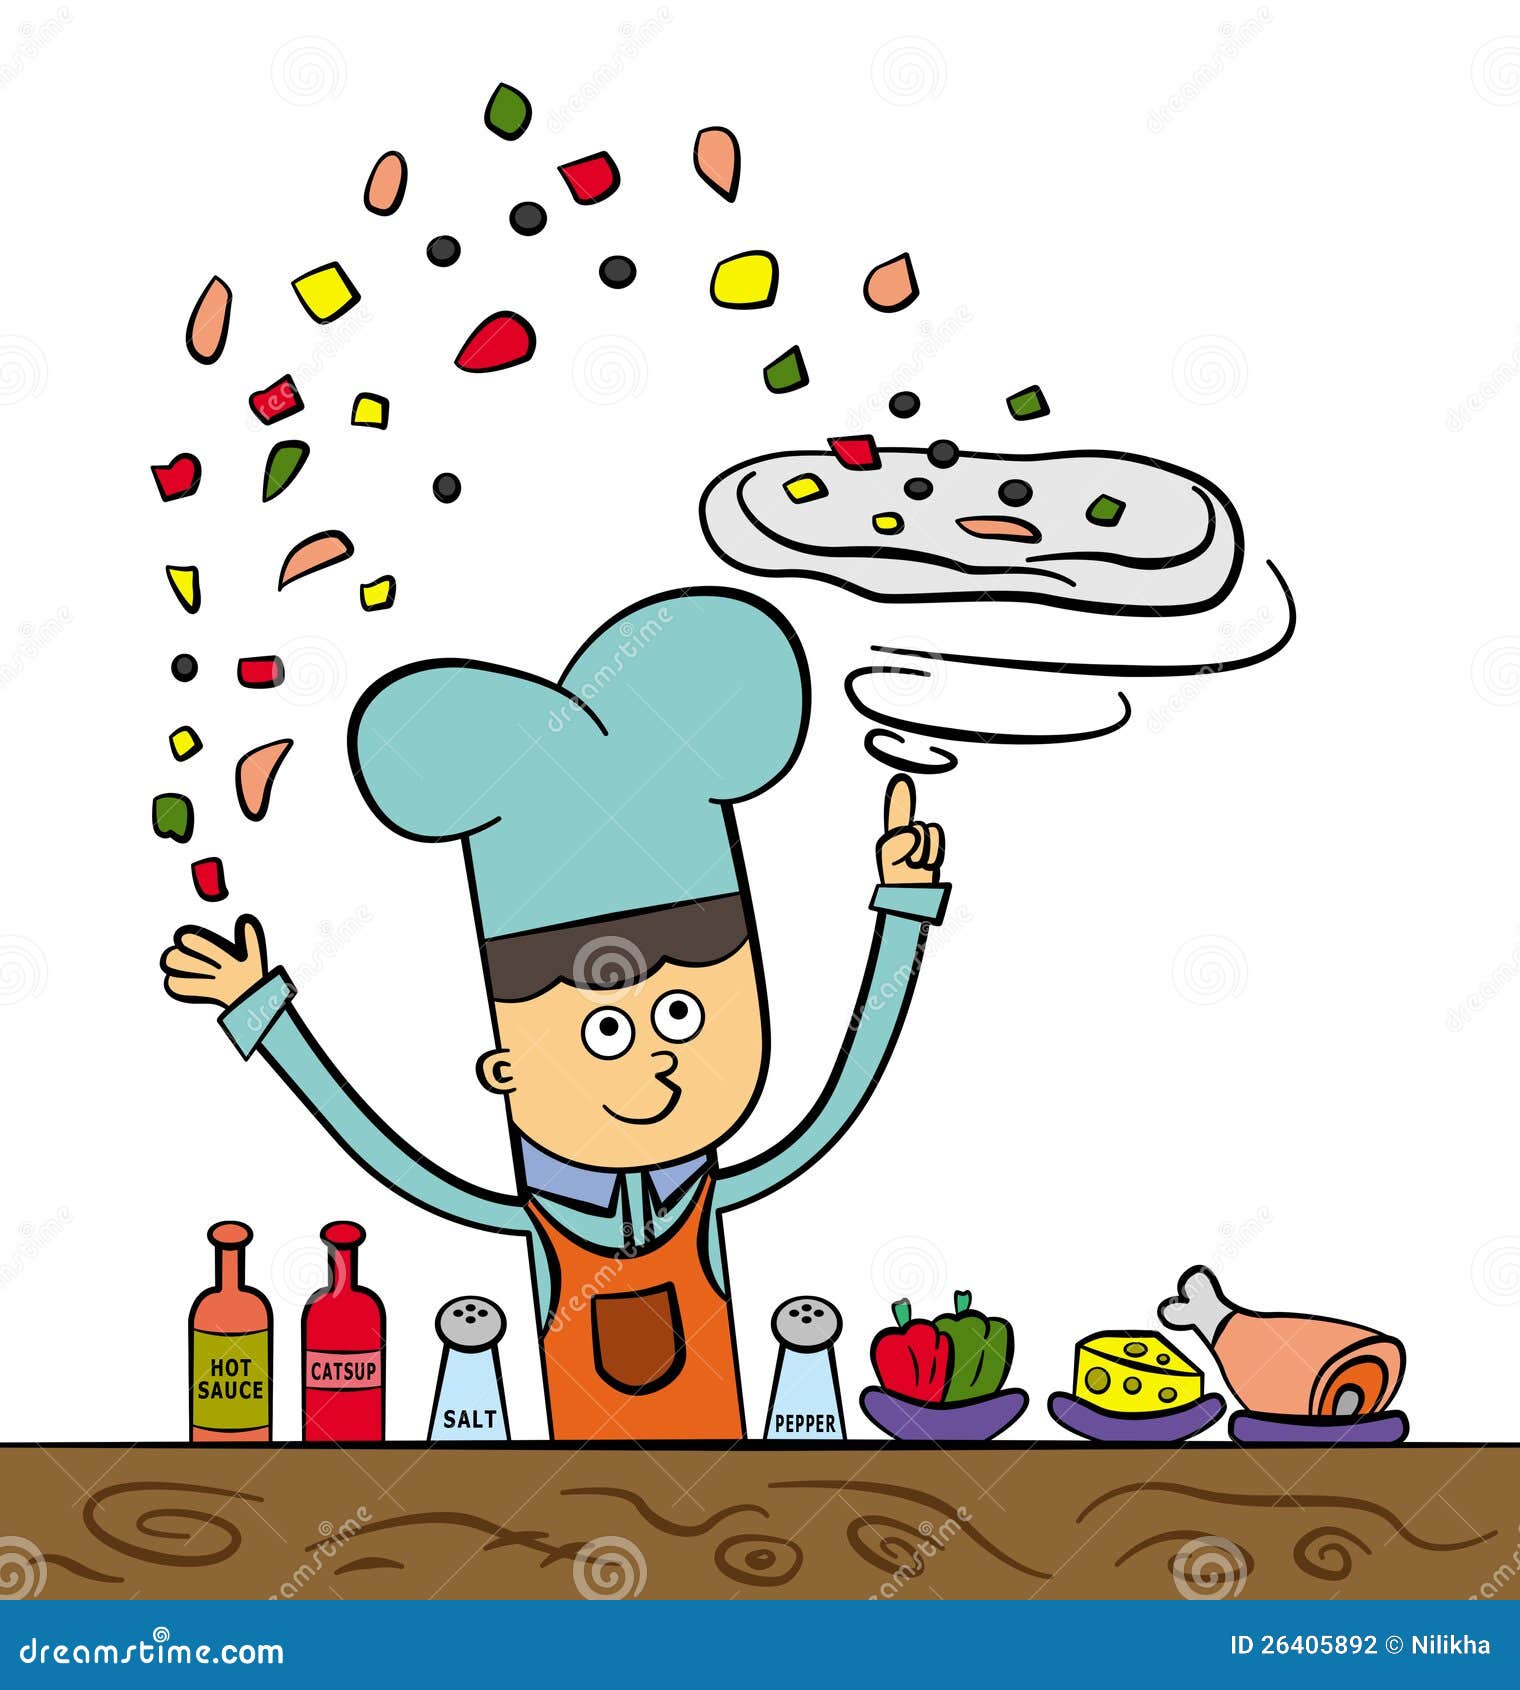 pizza ingredients clipart - photo #32